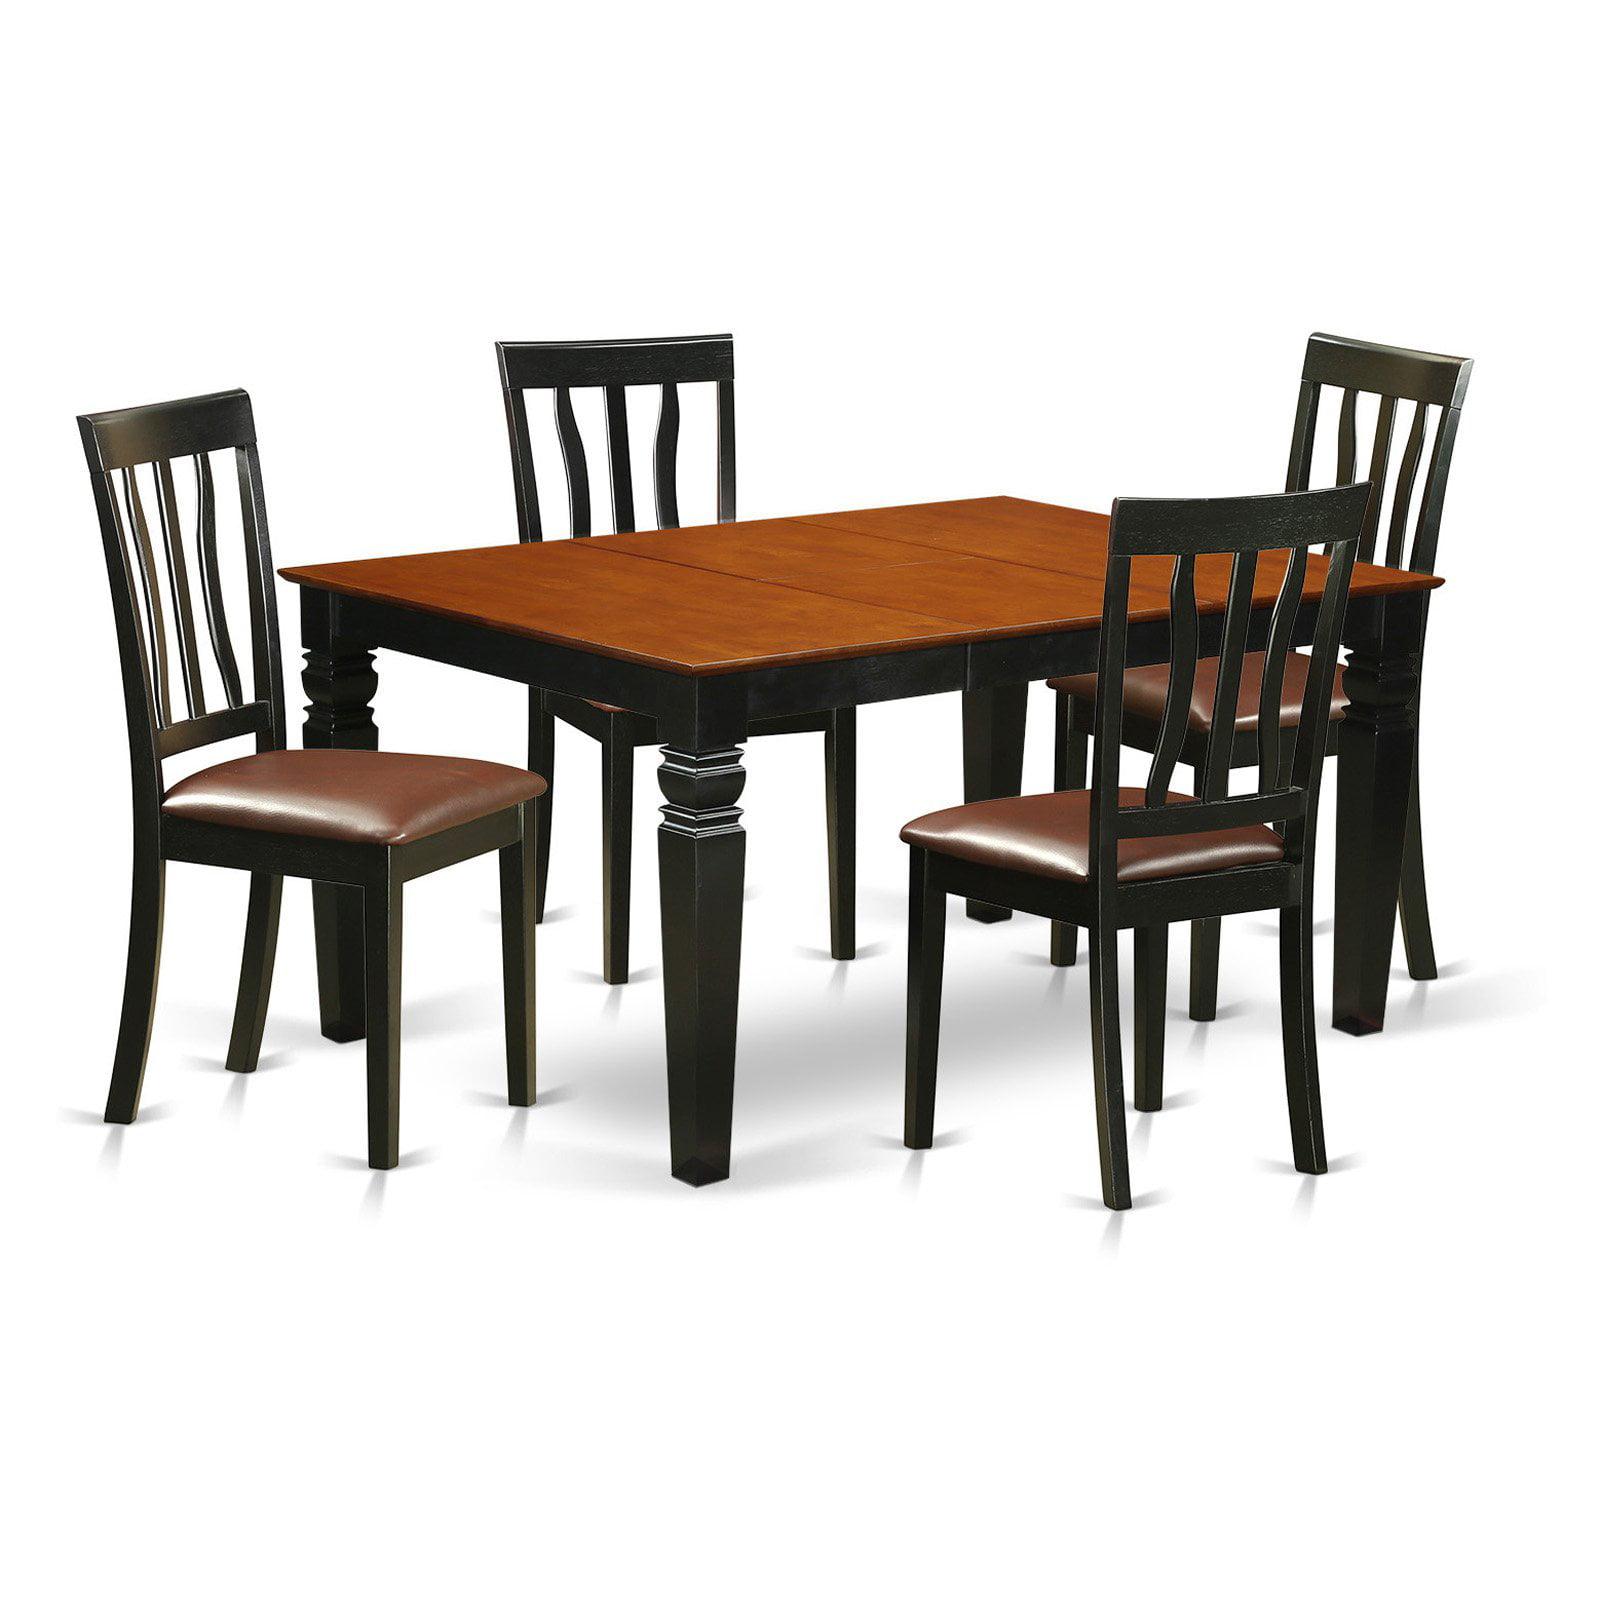 Weston 5-Piece Black & Cherry Dining Set with Leather-Seat Chairs